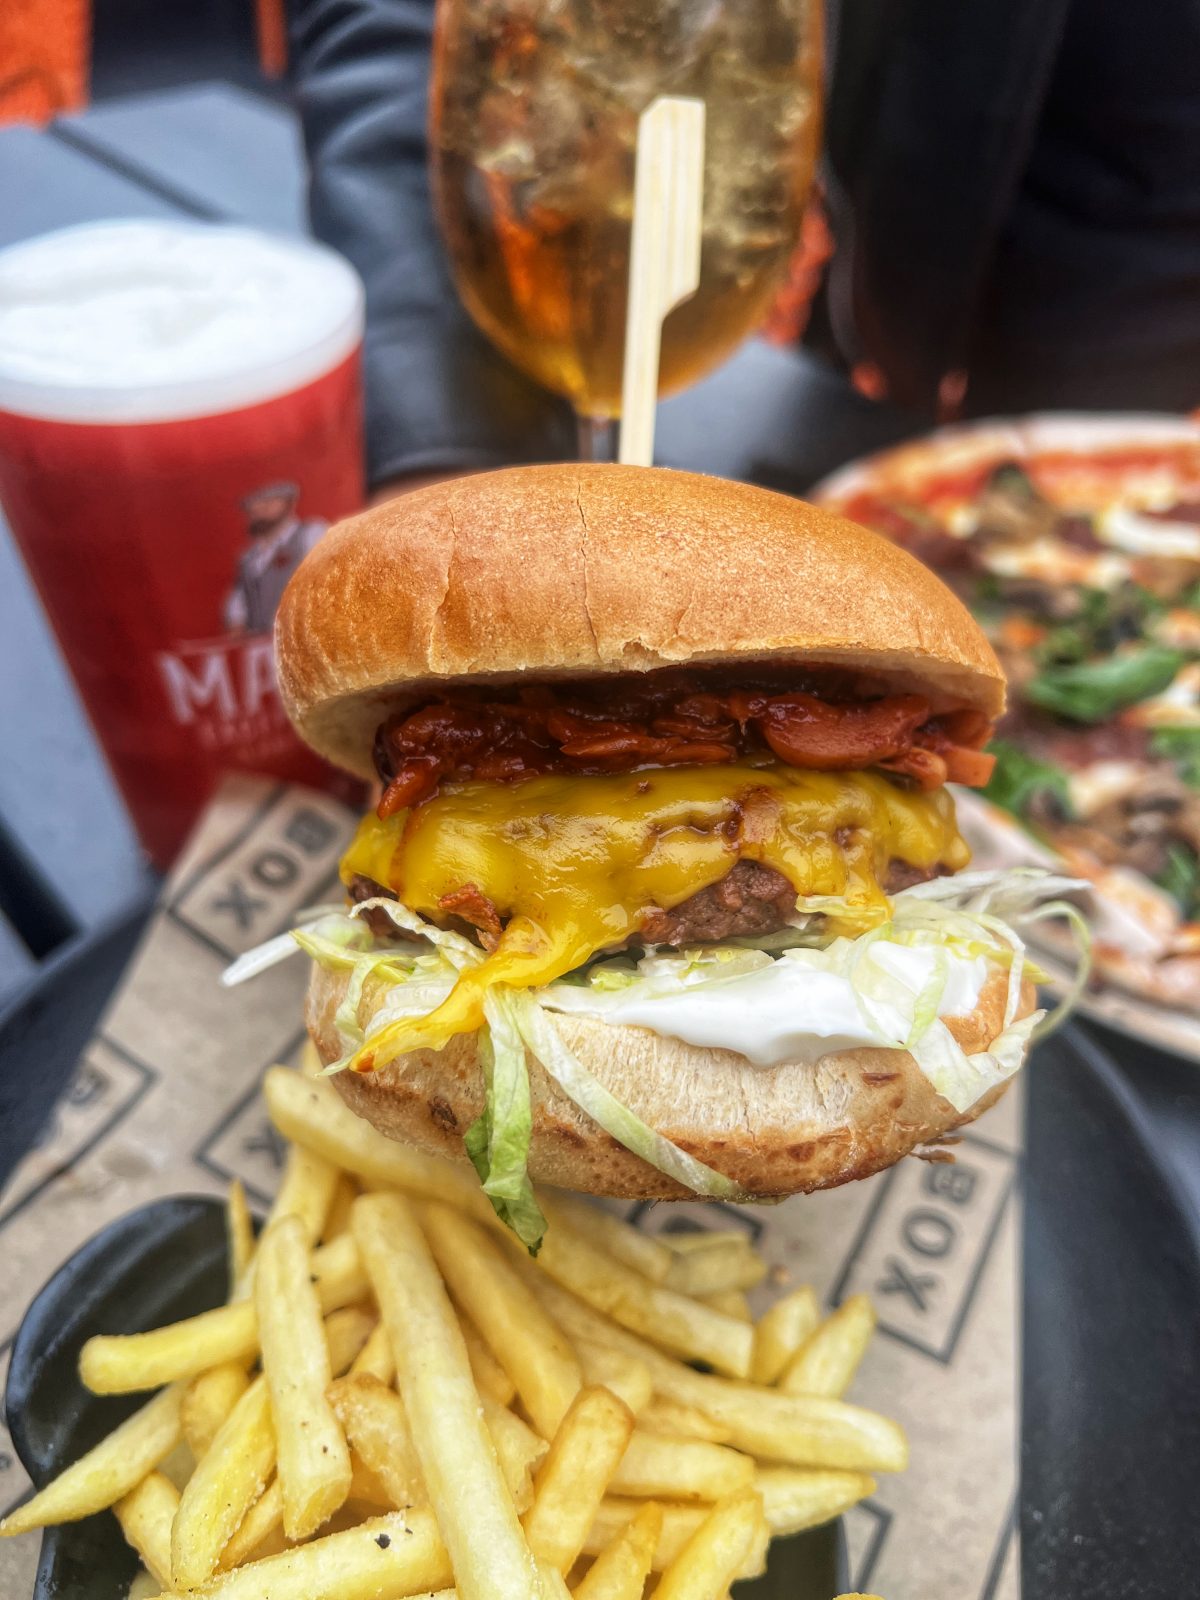 a burger with fries, a pizza and drink in the background.